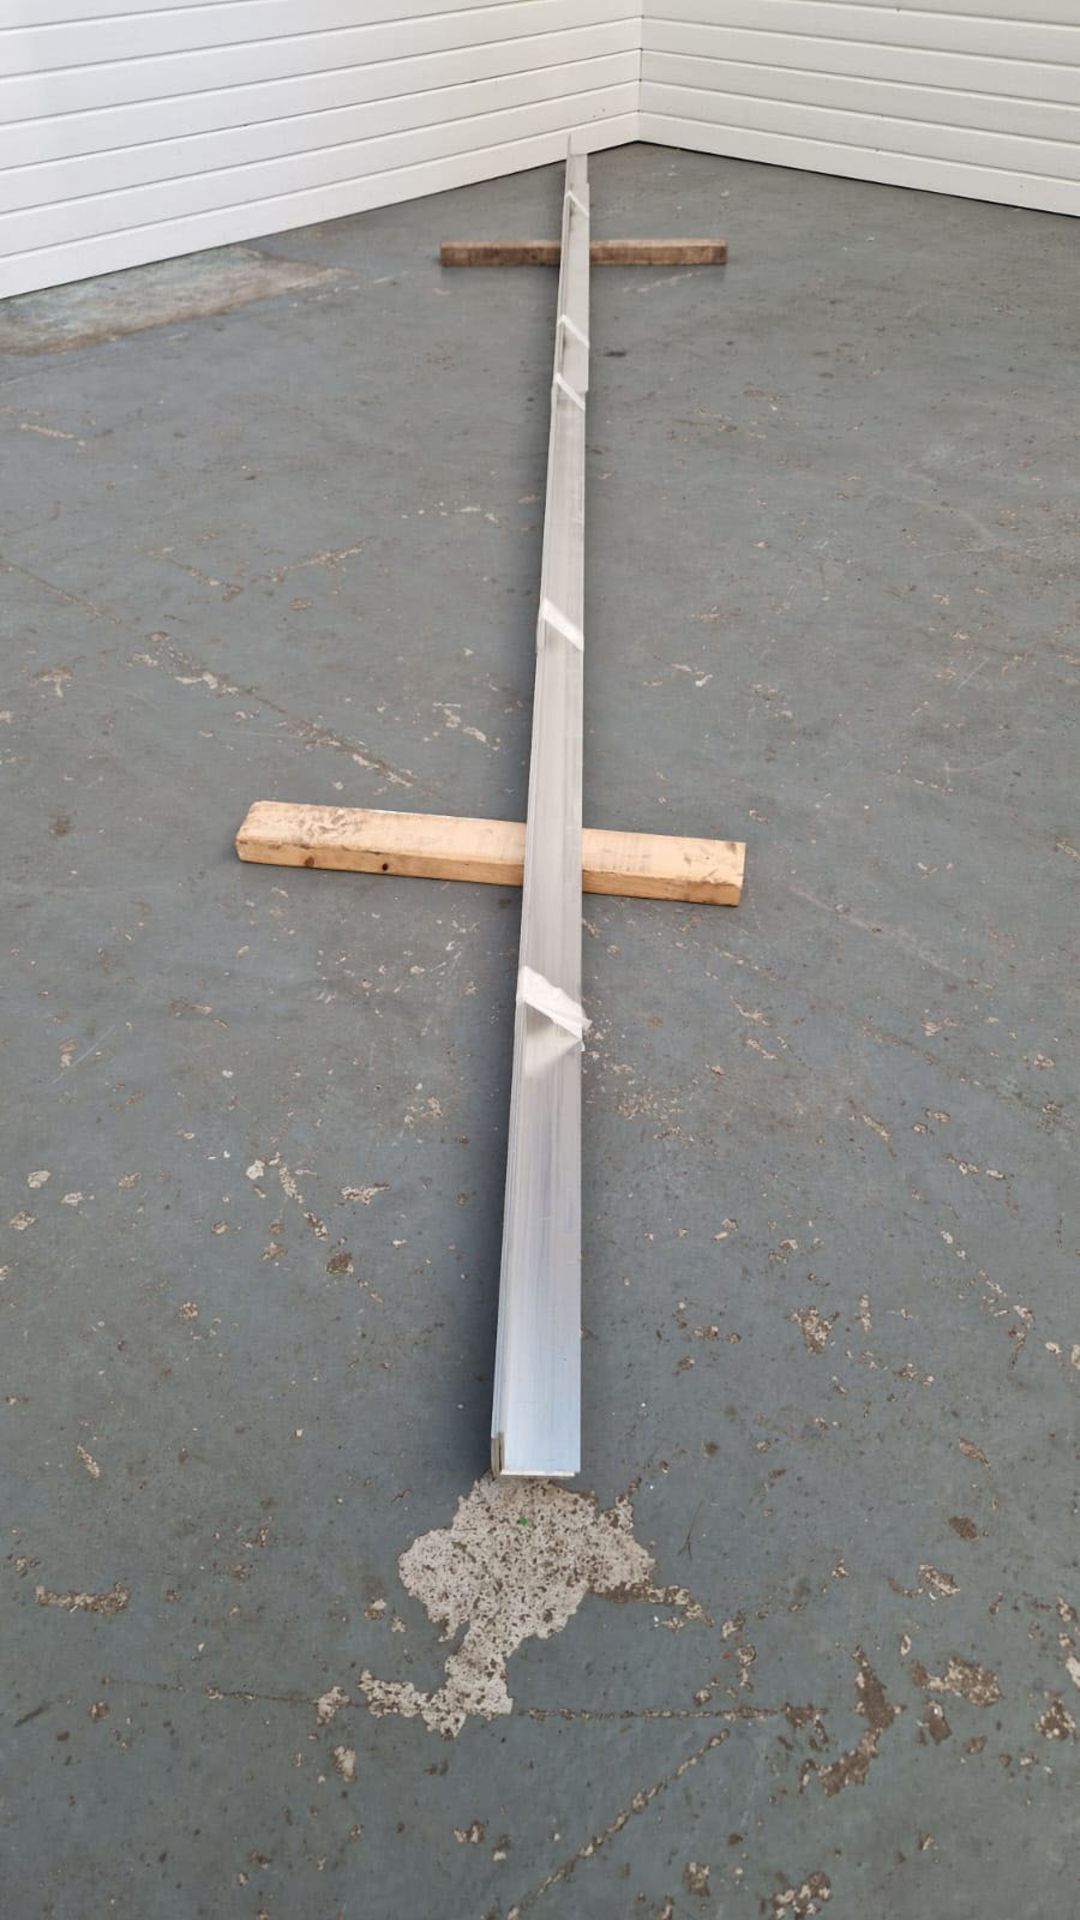 3 x Lengths of Aluminium 'L' Shape Angle Plate. Dimensions 2 1/2" x 2 1/2" x 1/8". - Image 3 of 5